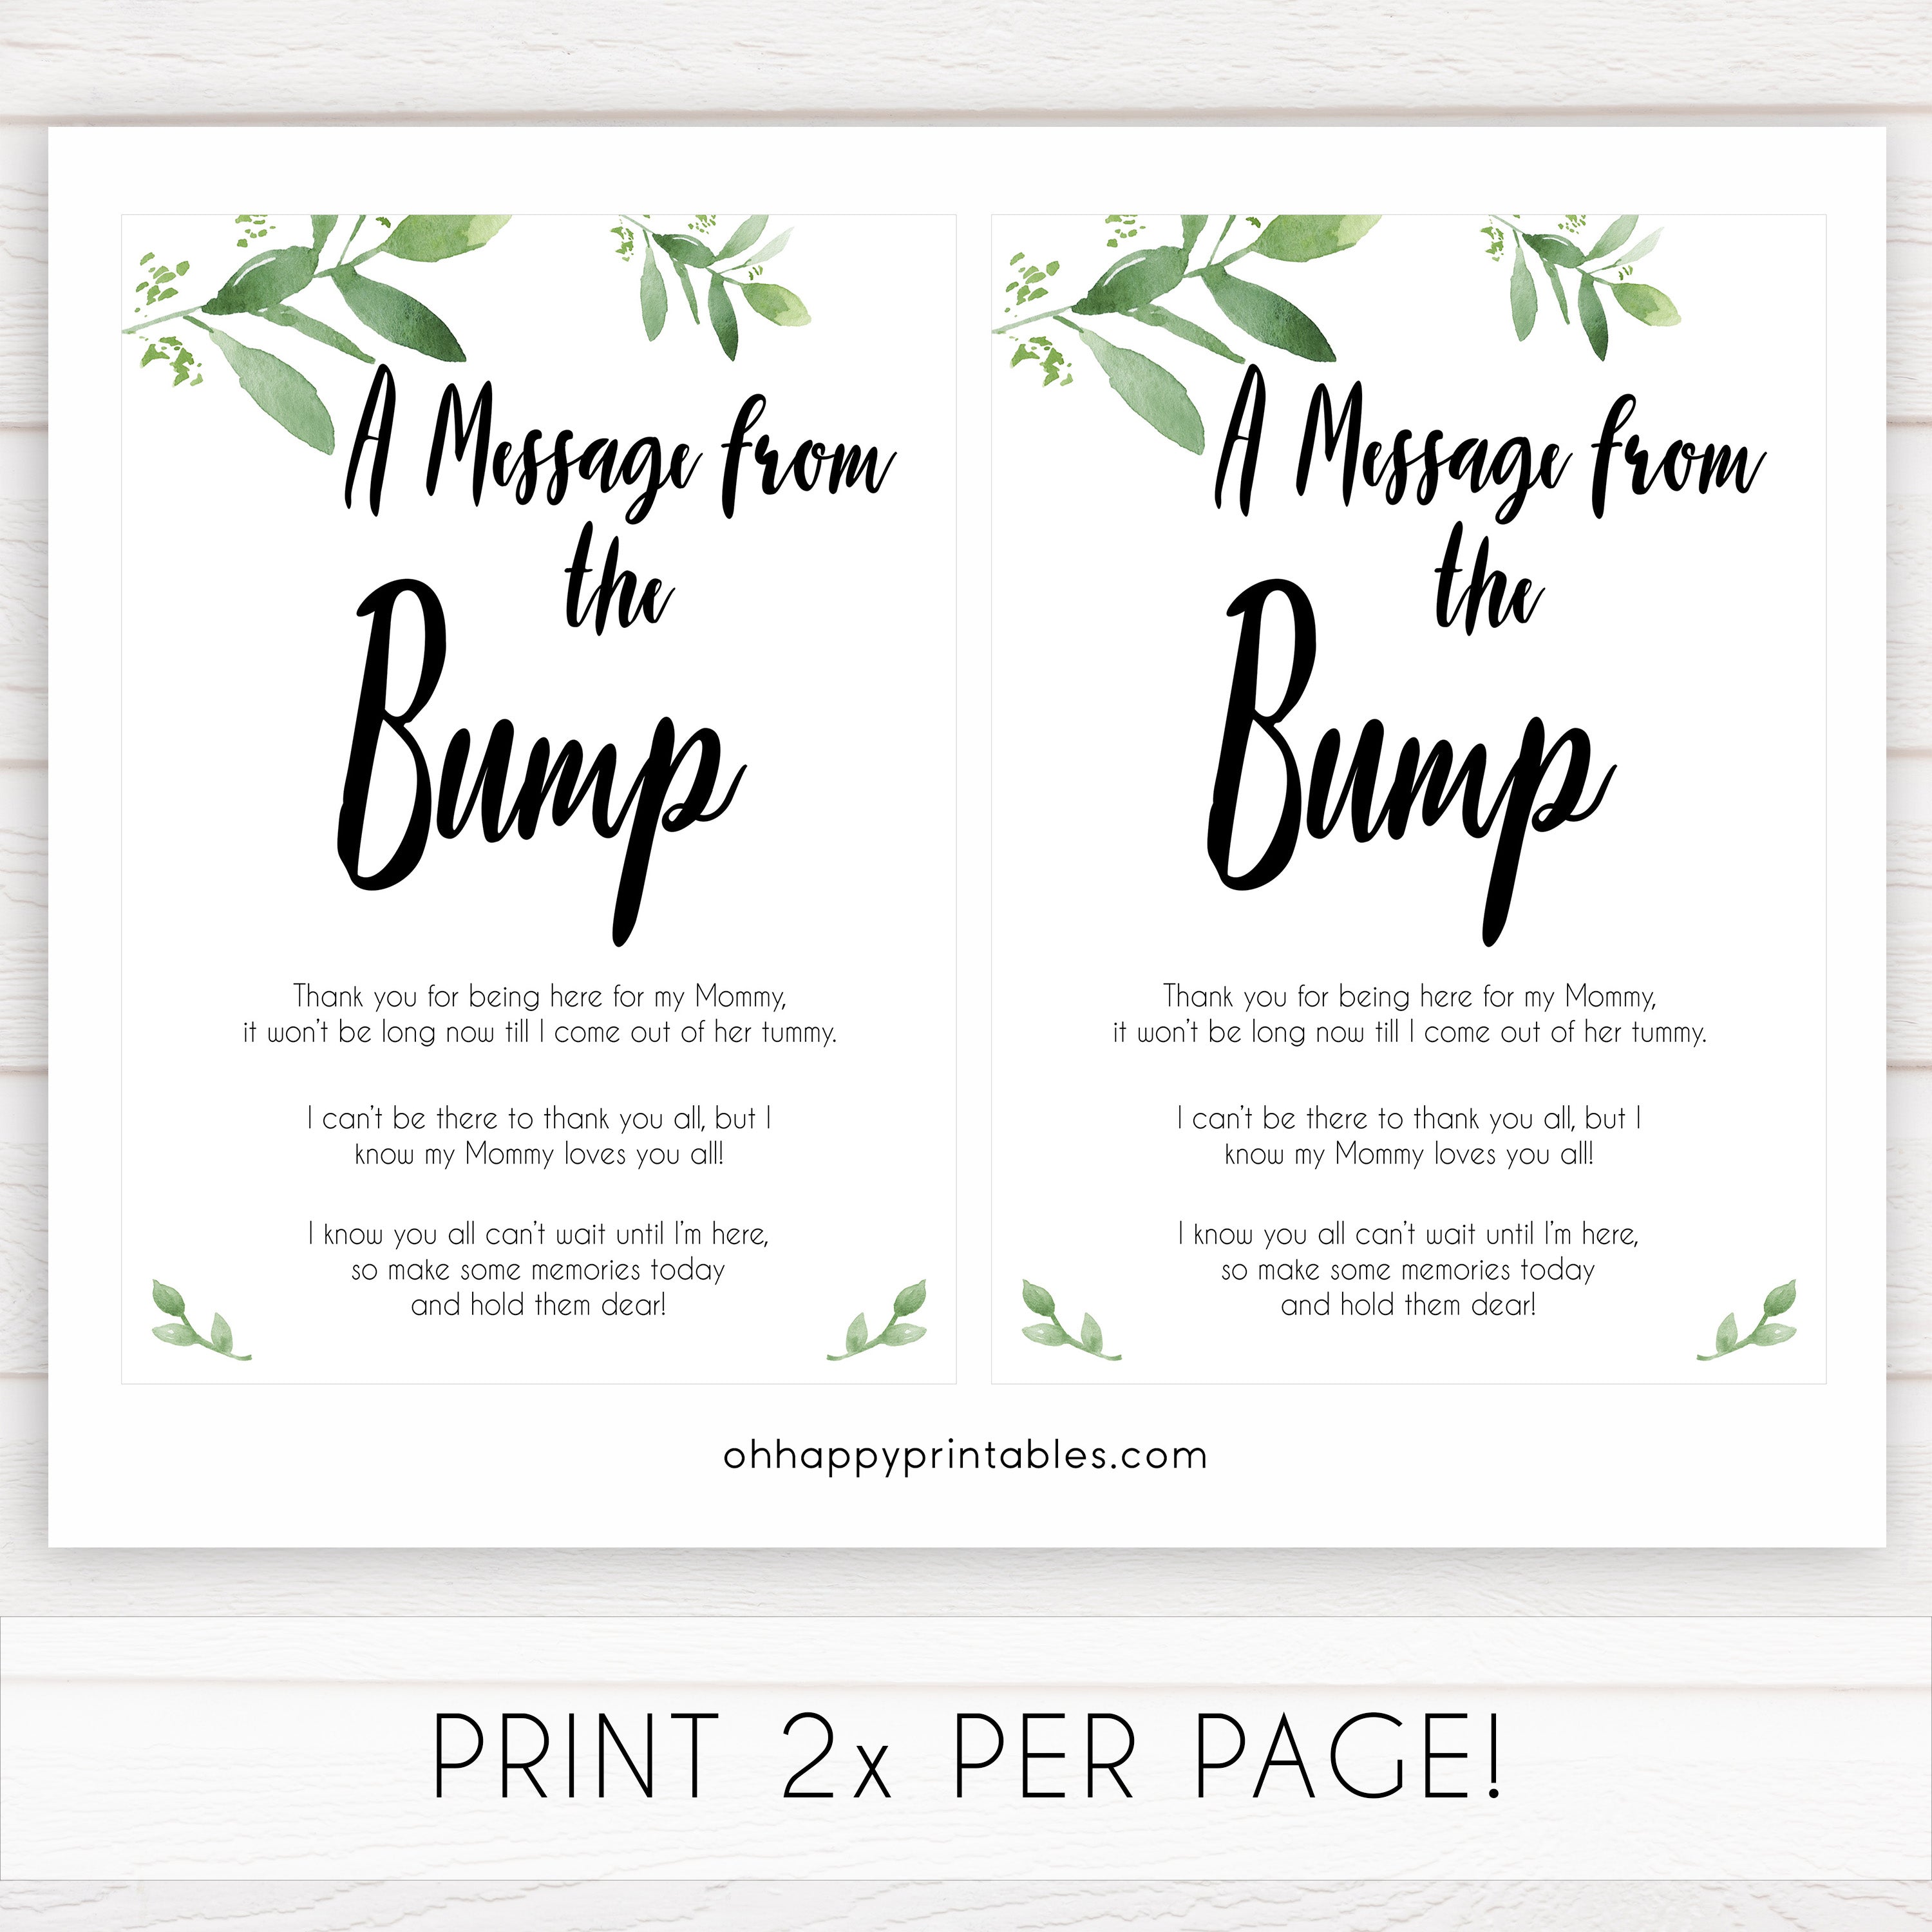 botanical message from bump baby shower sign, printable baby shower games, fun baby shower games